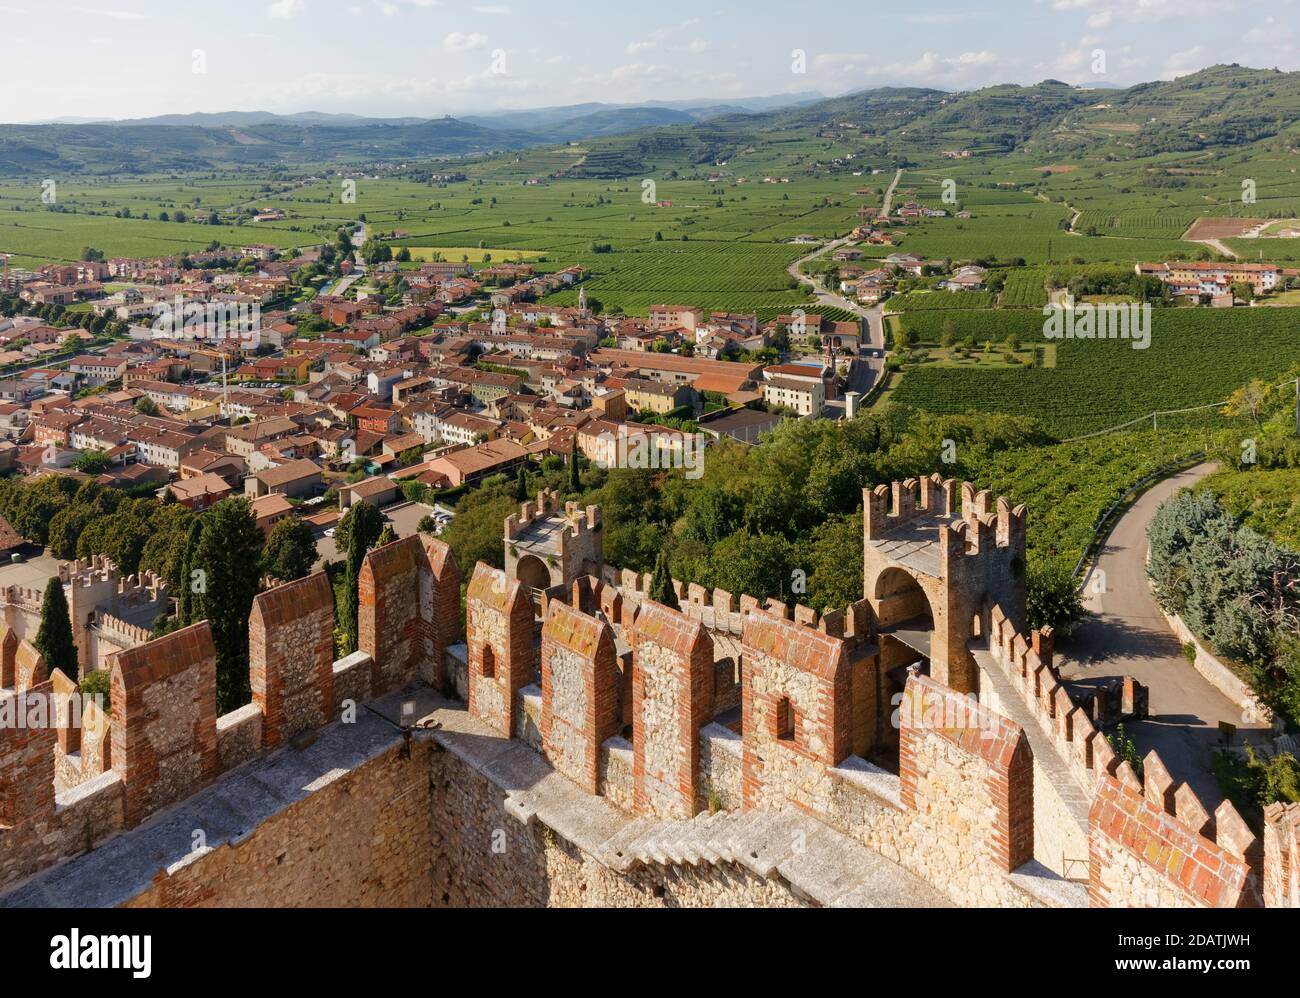 Town of Soave, Italy, seen from the walls of its medieval castle Stock Photo